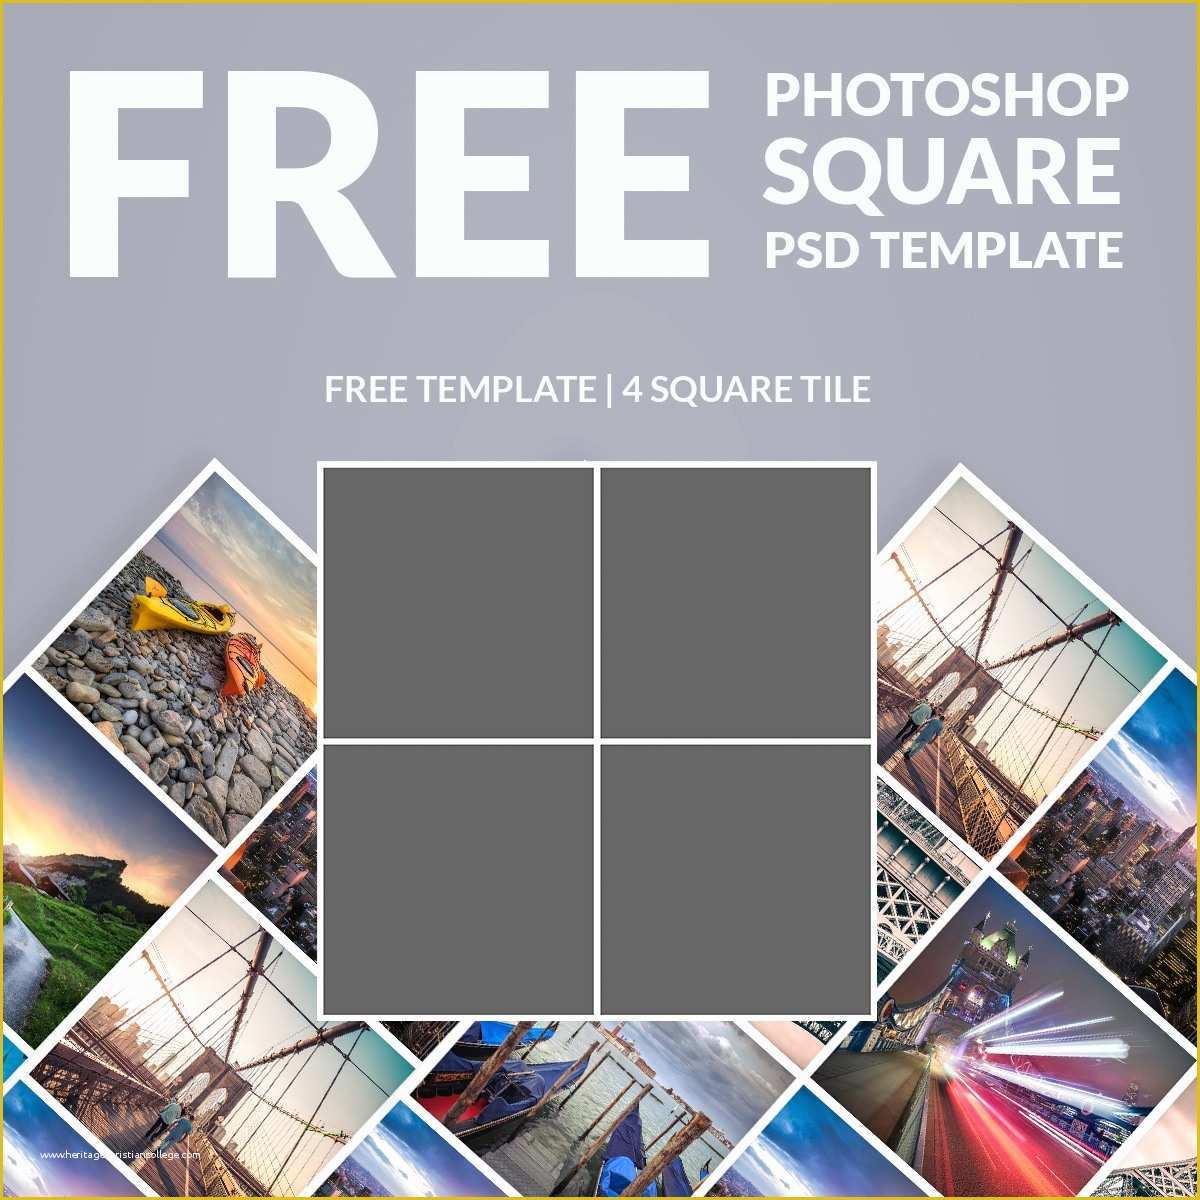 Free Photo Collage Templates Of Free Shop Template Collage Square Download now